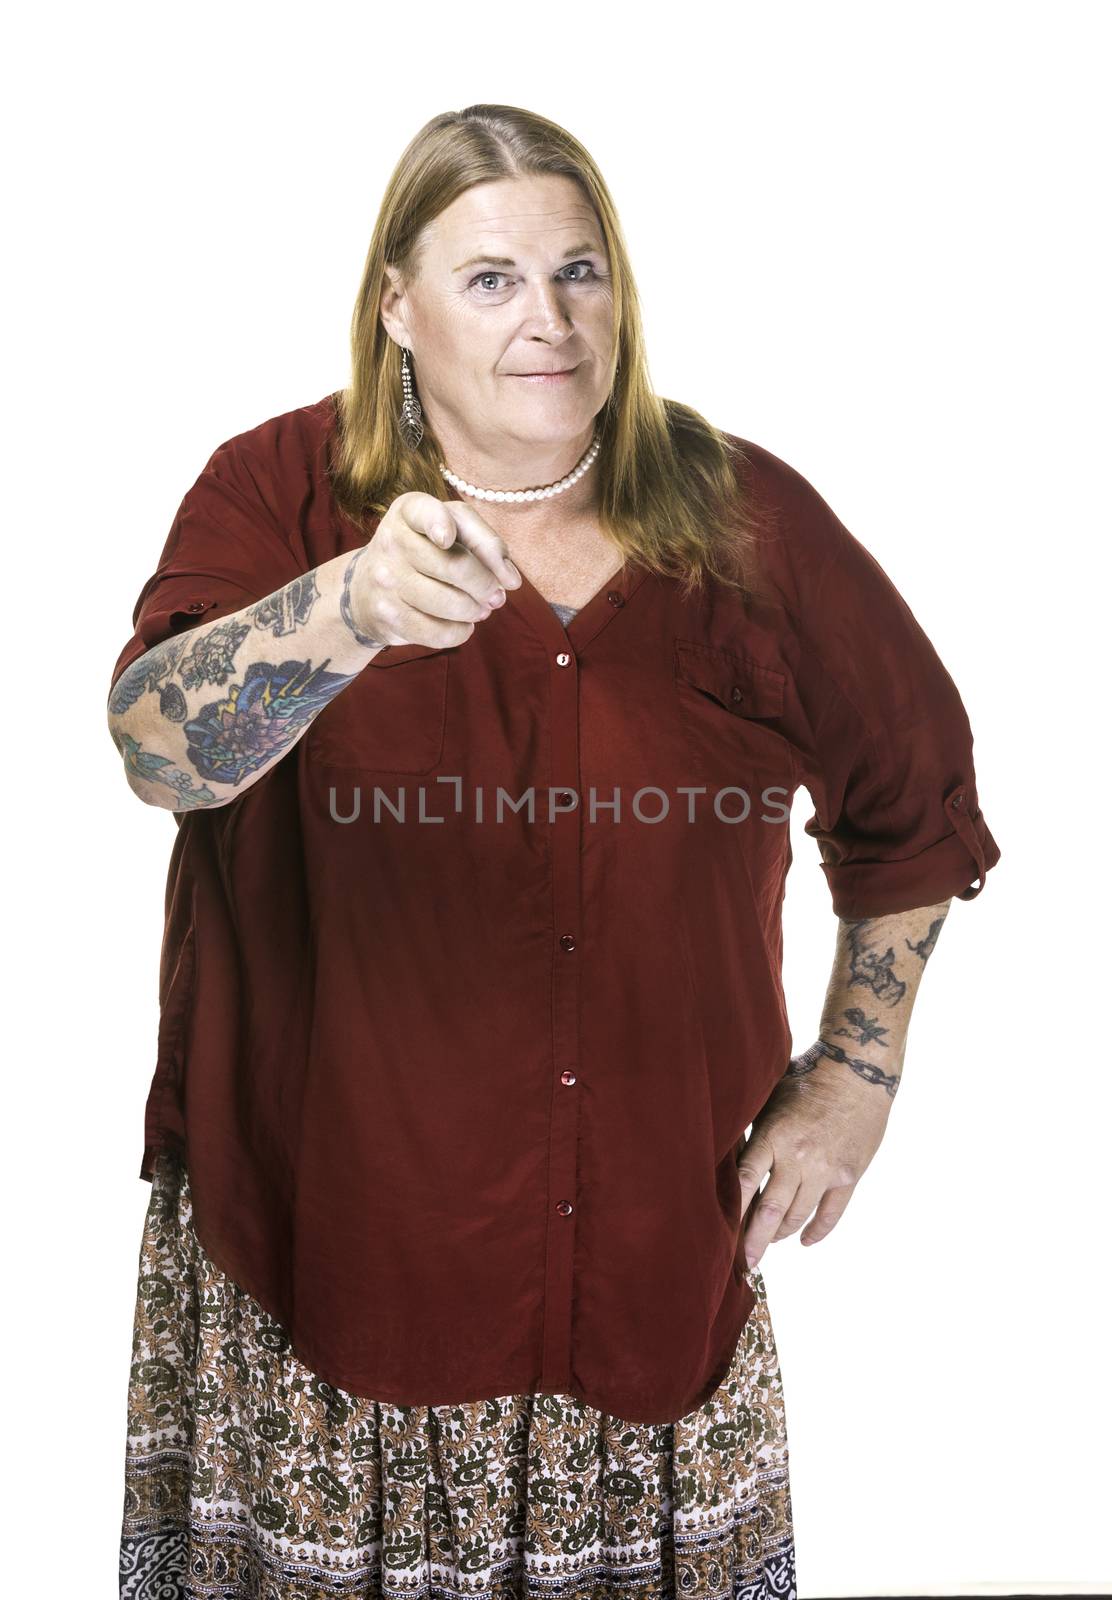 Transgender Woman in Pearl Necklace Pointing by Creatista